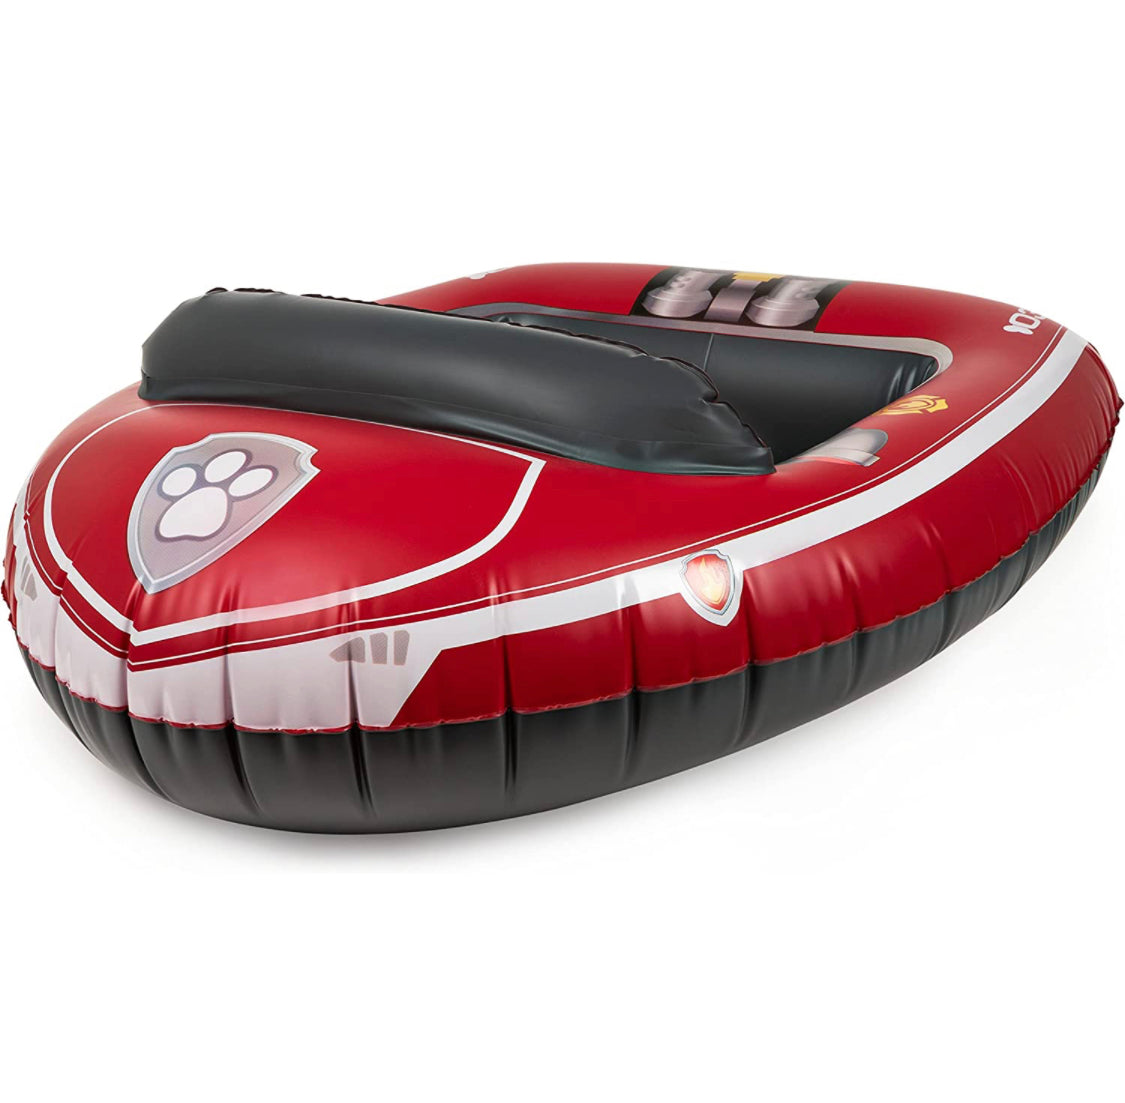 KIDS - Paw Patrol Inflatable Water Boat